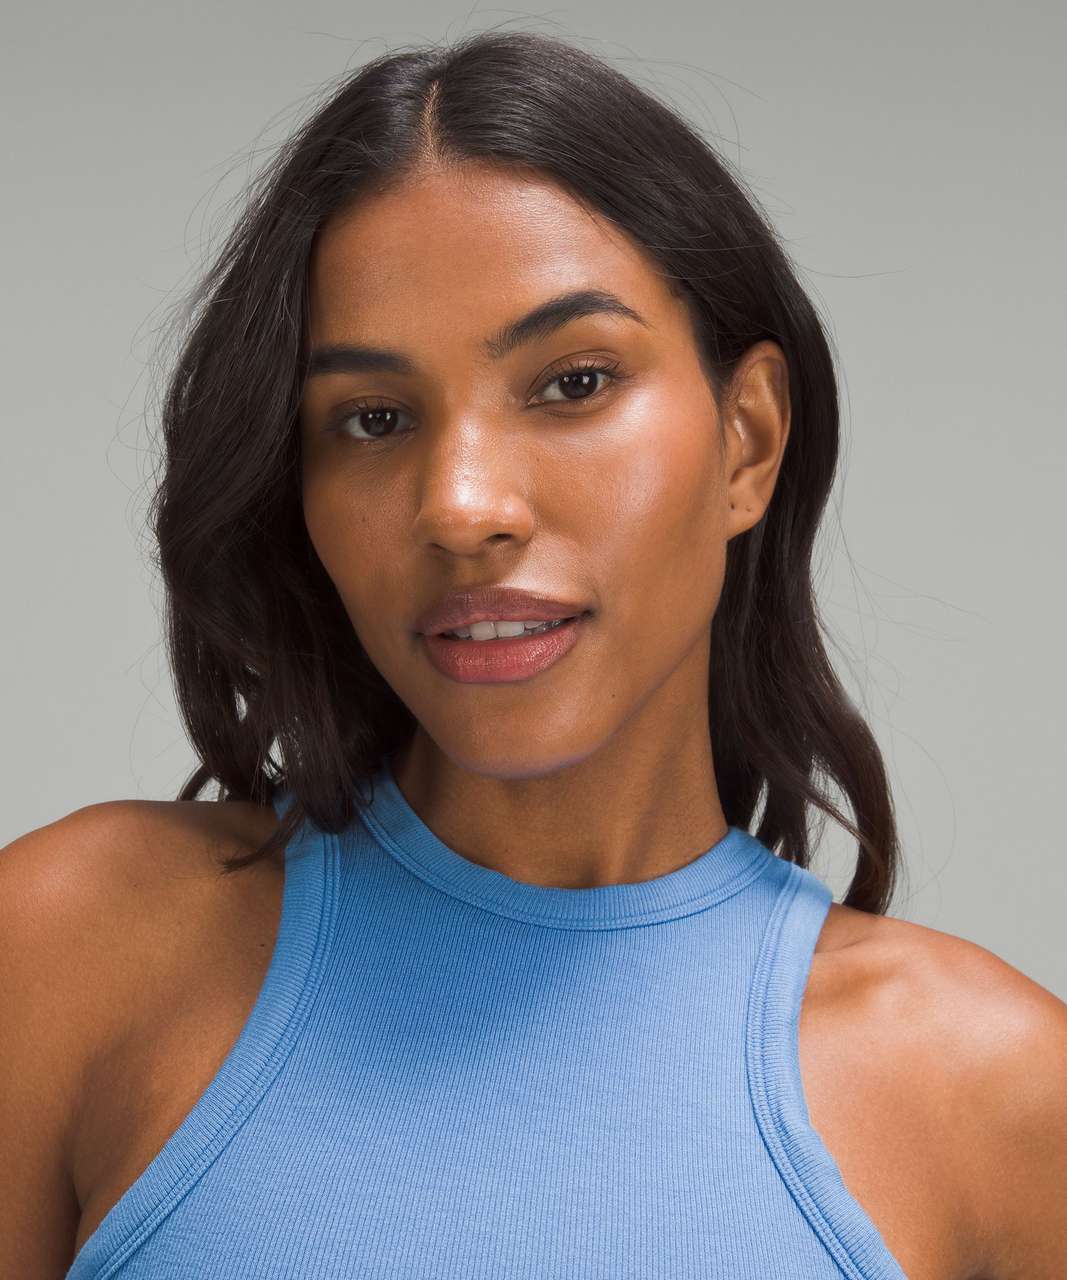 Lululemon Hold Tight Cropped Tank Top - Blue Nile